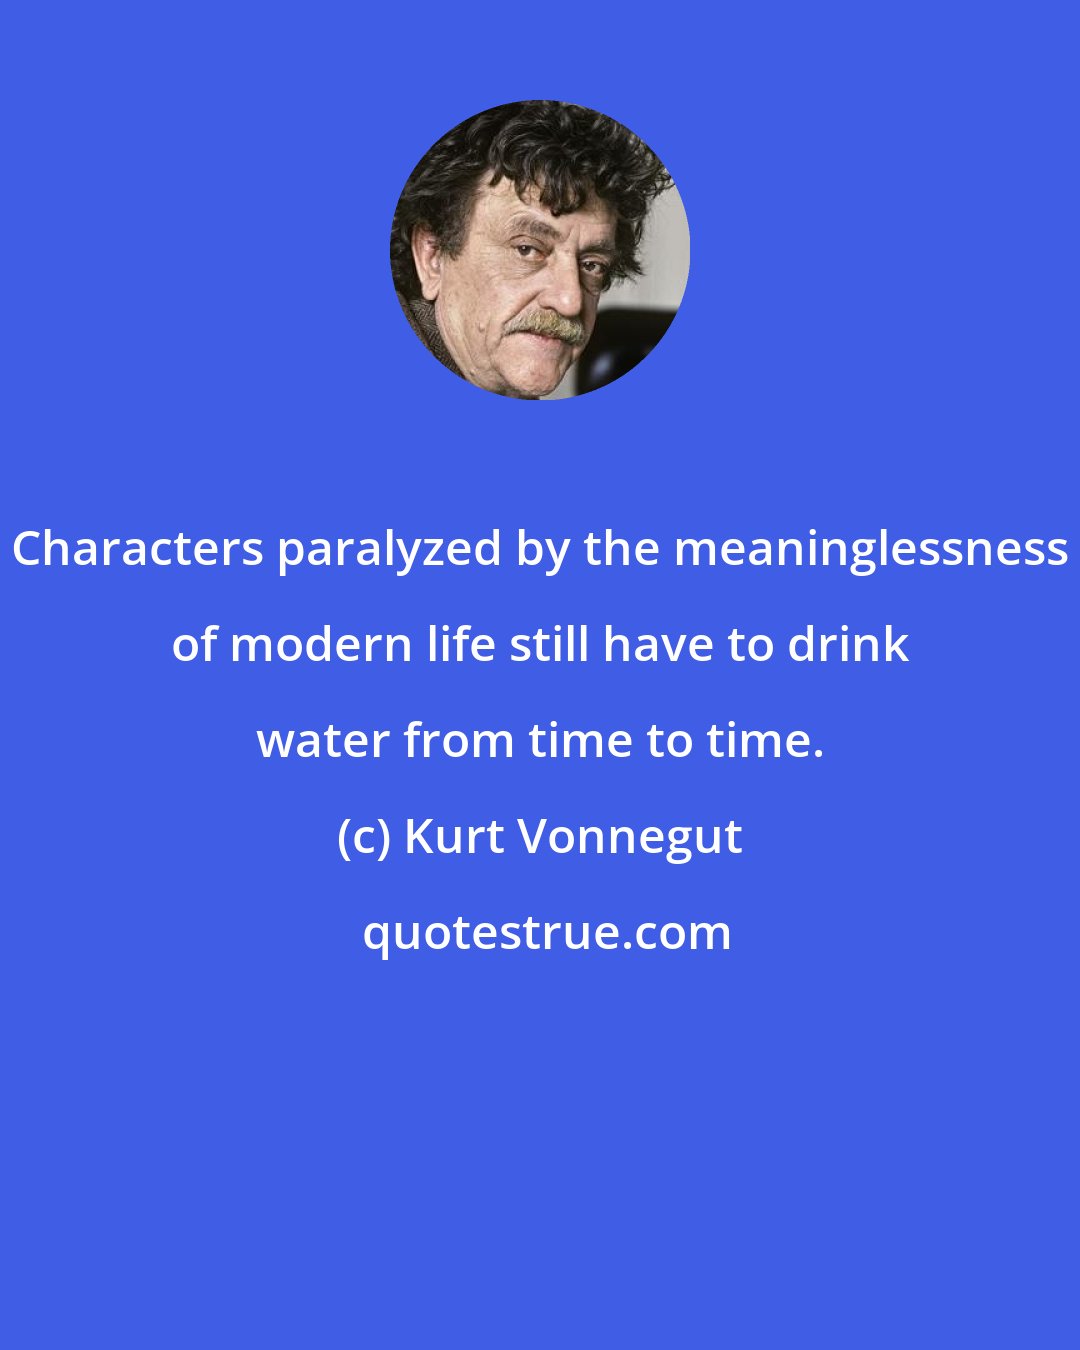 Kurt Vonnegut: Characters paralyzed by the meaninglessness of modern life still have to drink water from time to time.